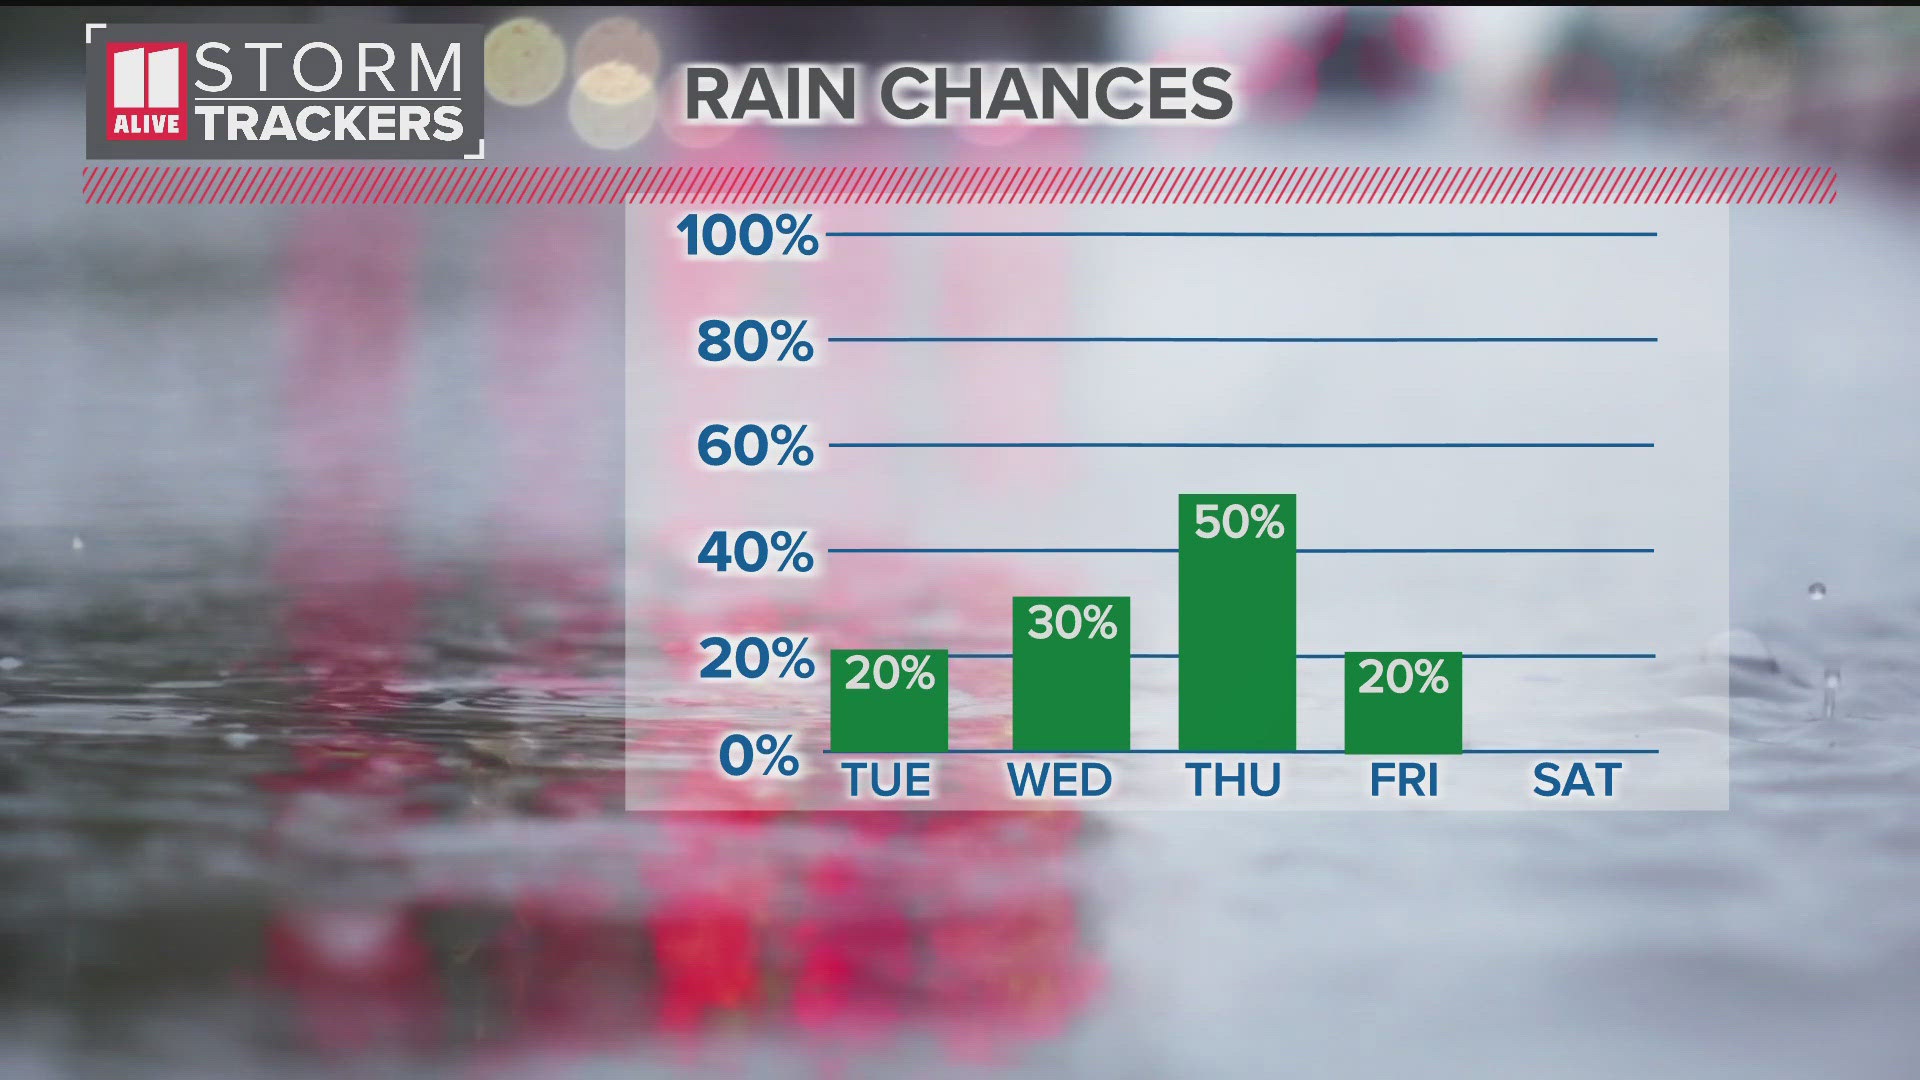 A higher coverage of showers and storms return later this week